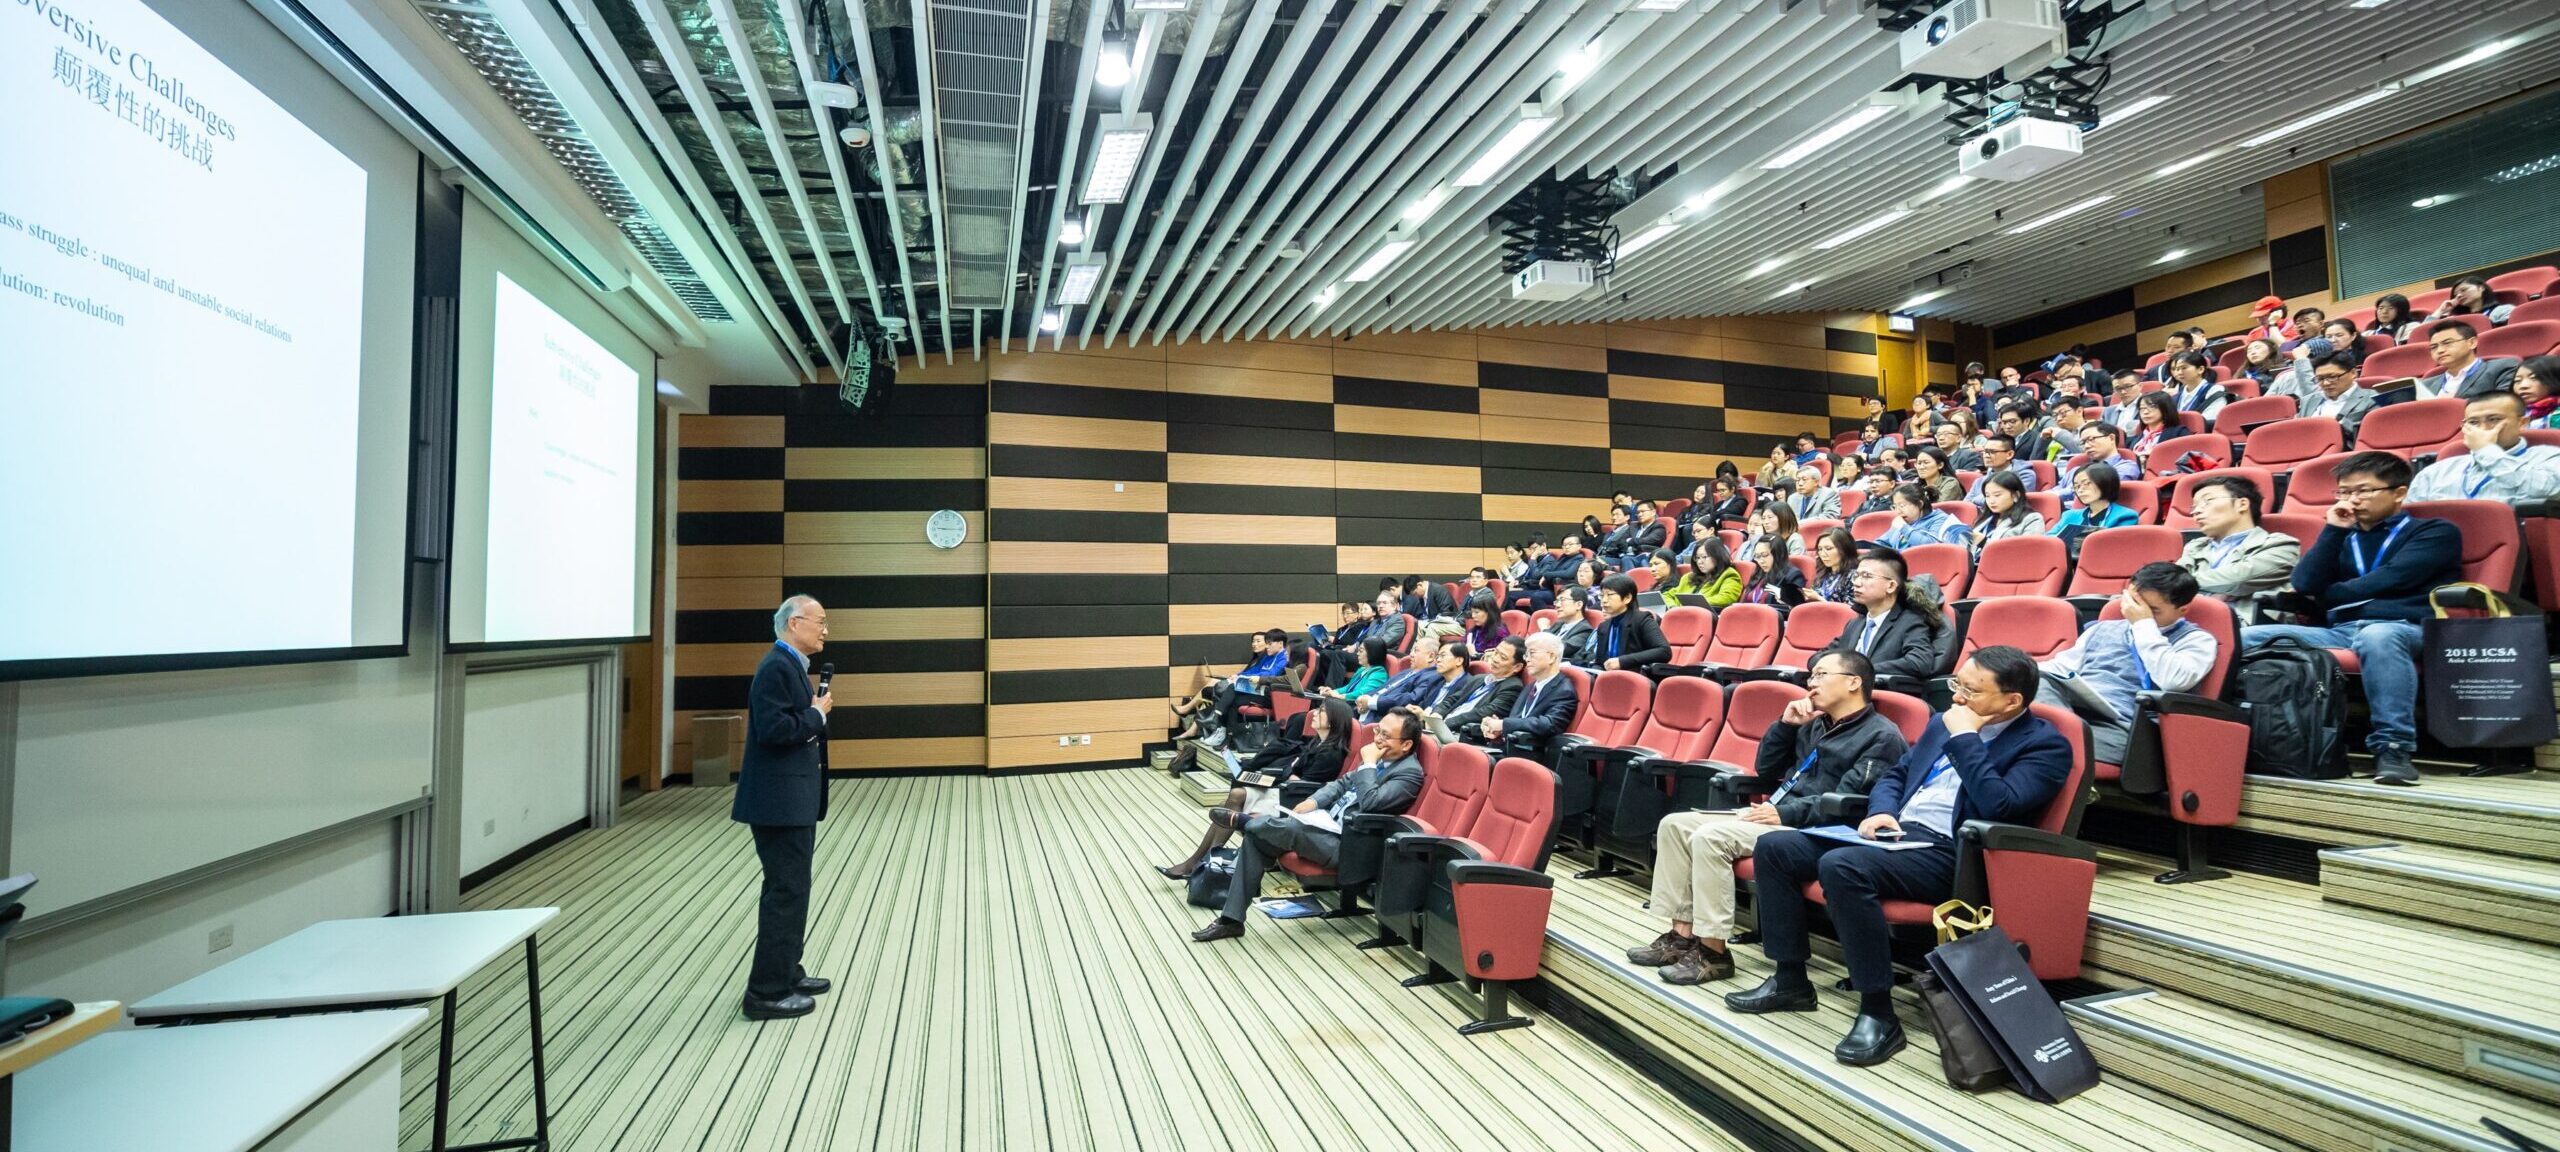 Man speaking in front of a slideshow to an audience sitting in a lecture hall.